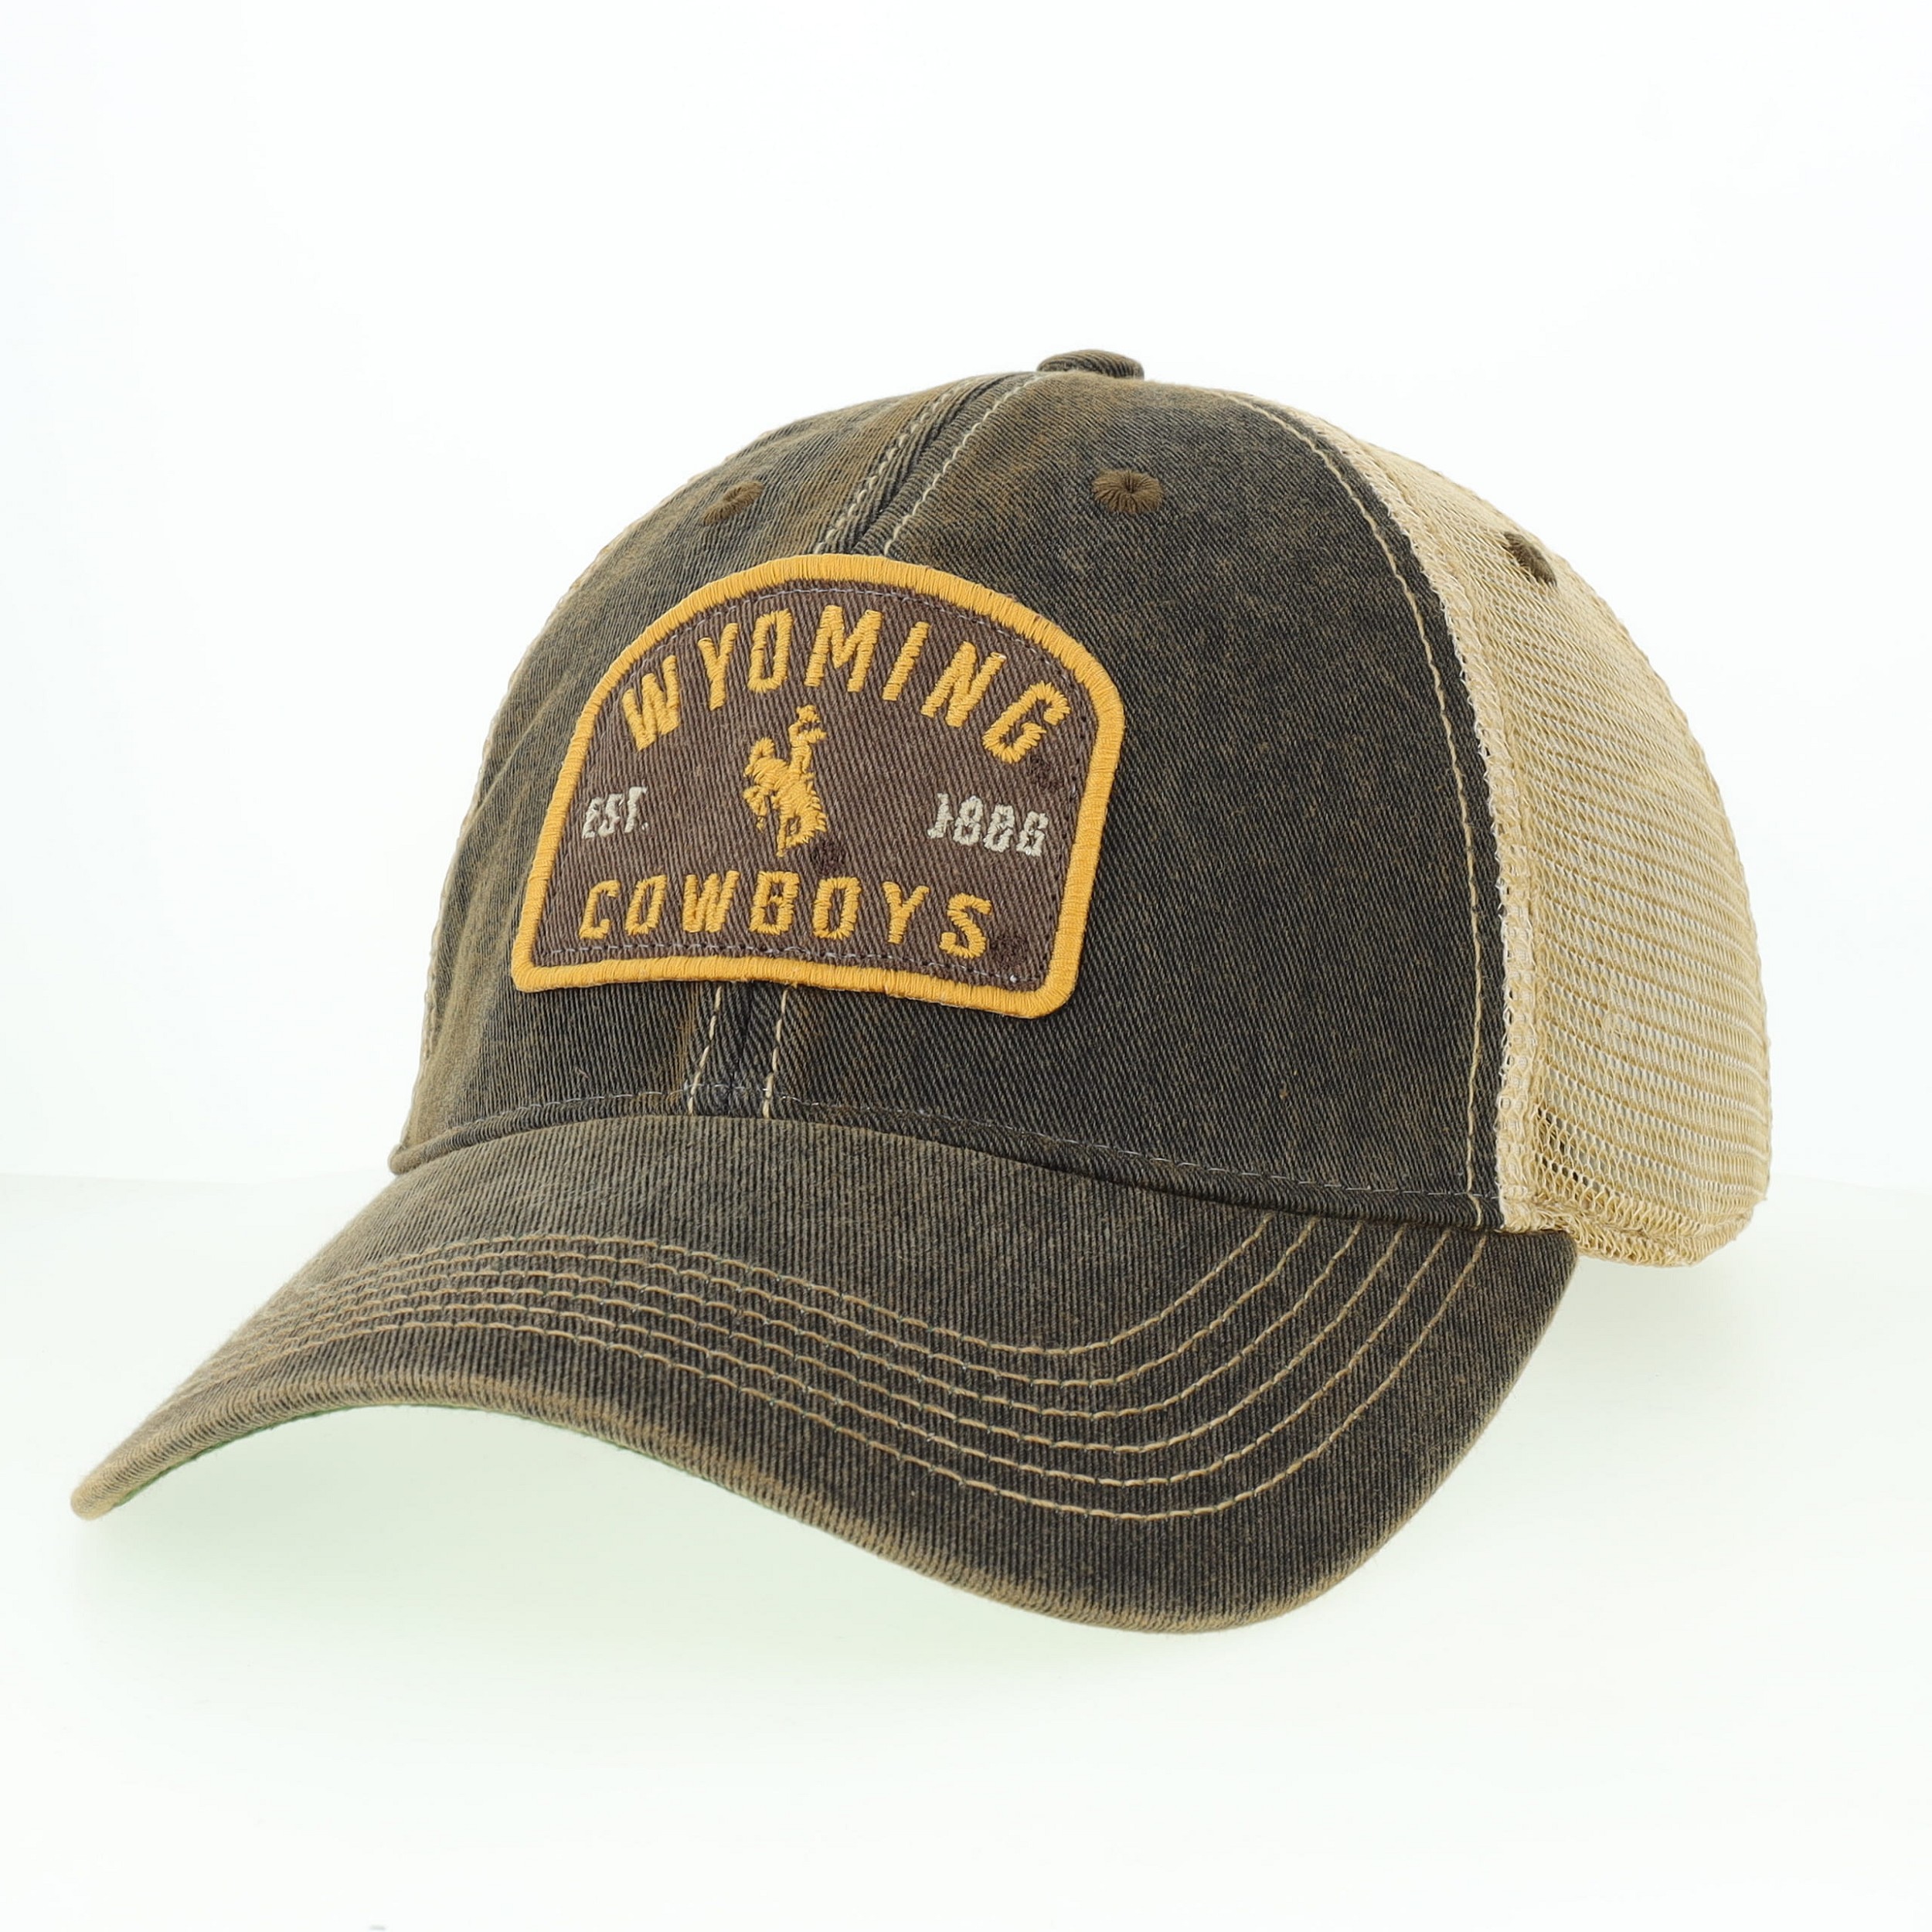 Grey hat brim and front is grey with white mesh backing. Patch on front is wyoming, with bucking horse under and cowboys at bottom. in gold.